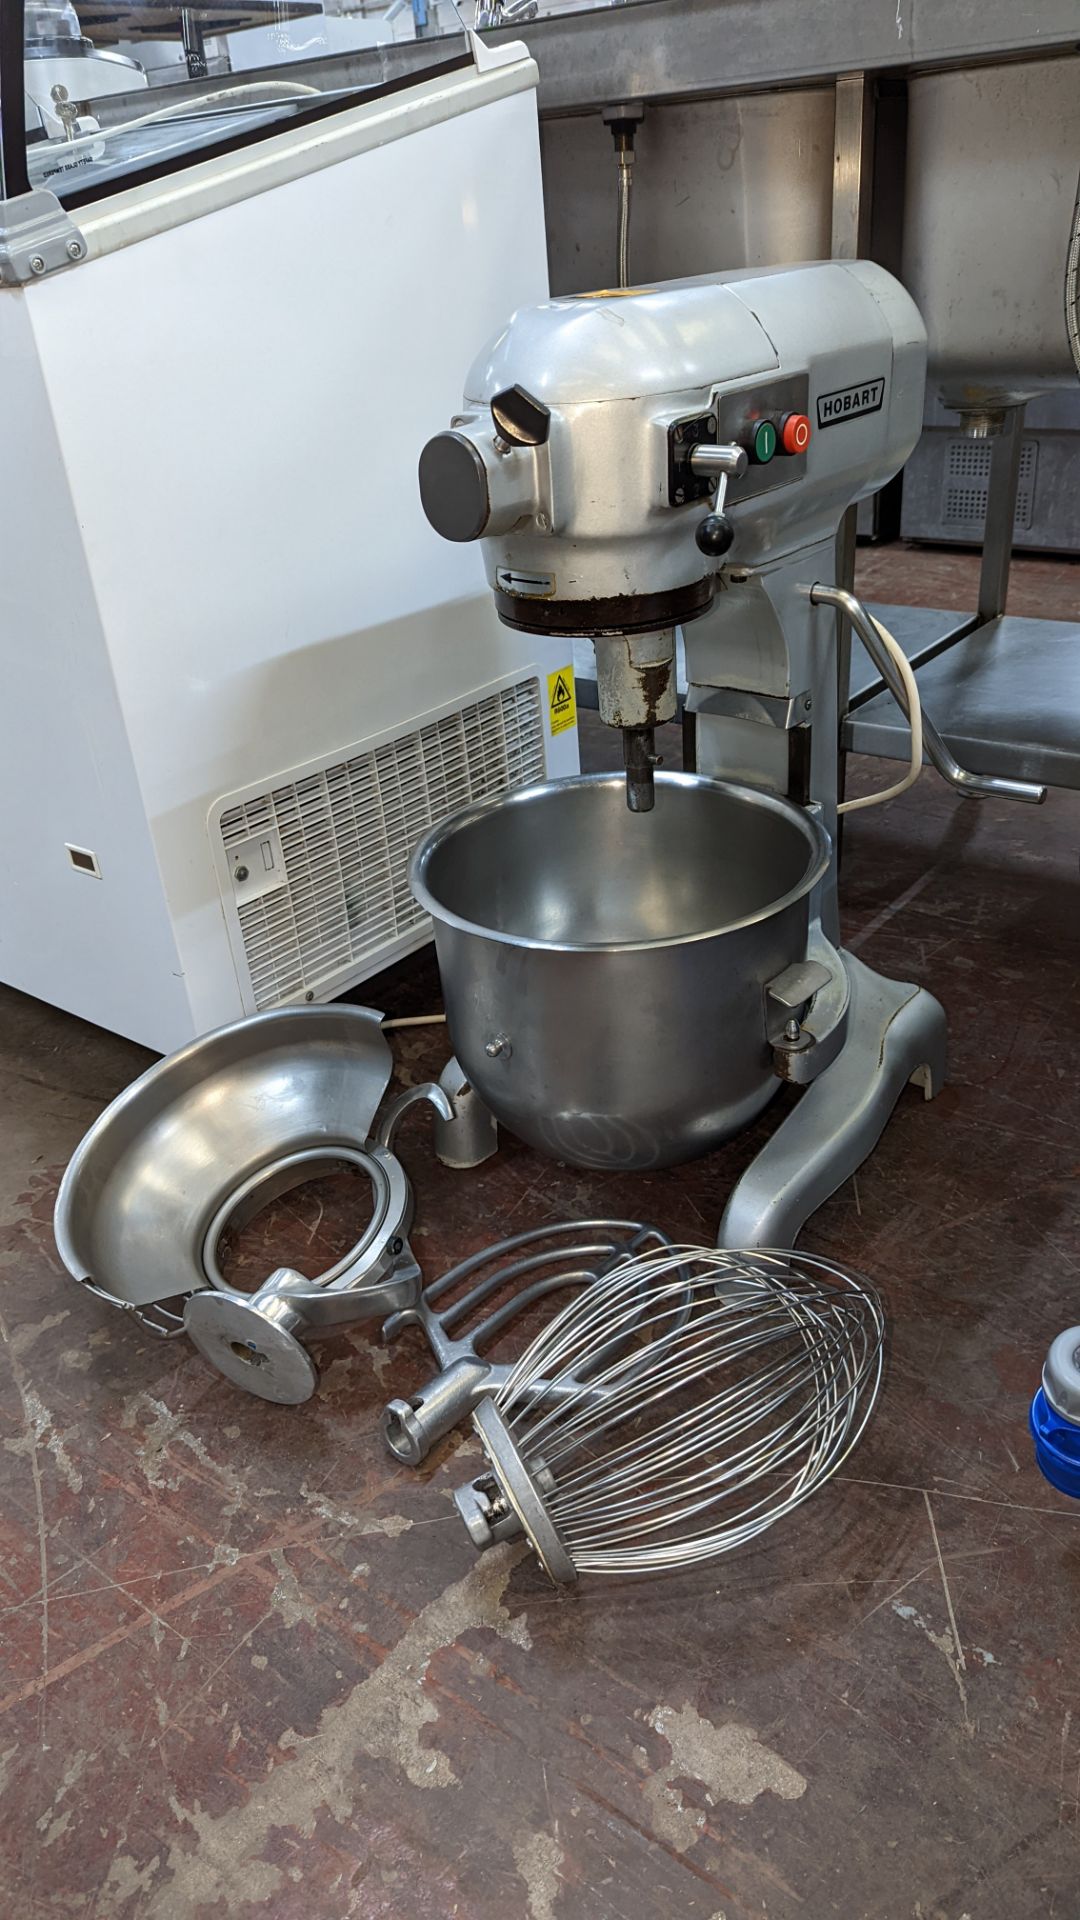 Hobart commercial mixer incorporating removable bowl, guard & 3 assorted paddle/mixer attachments - Image 5 of 11